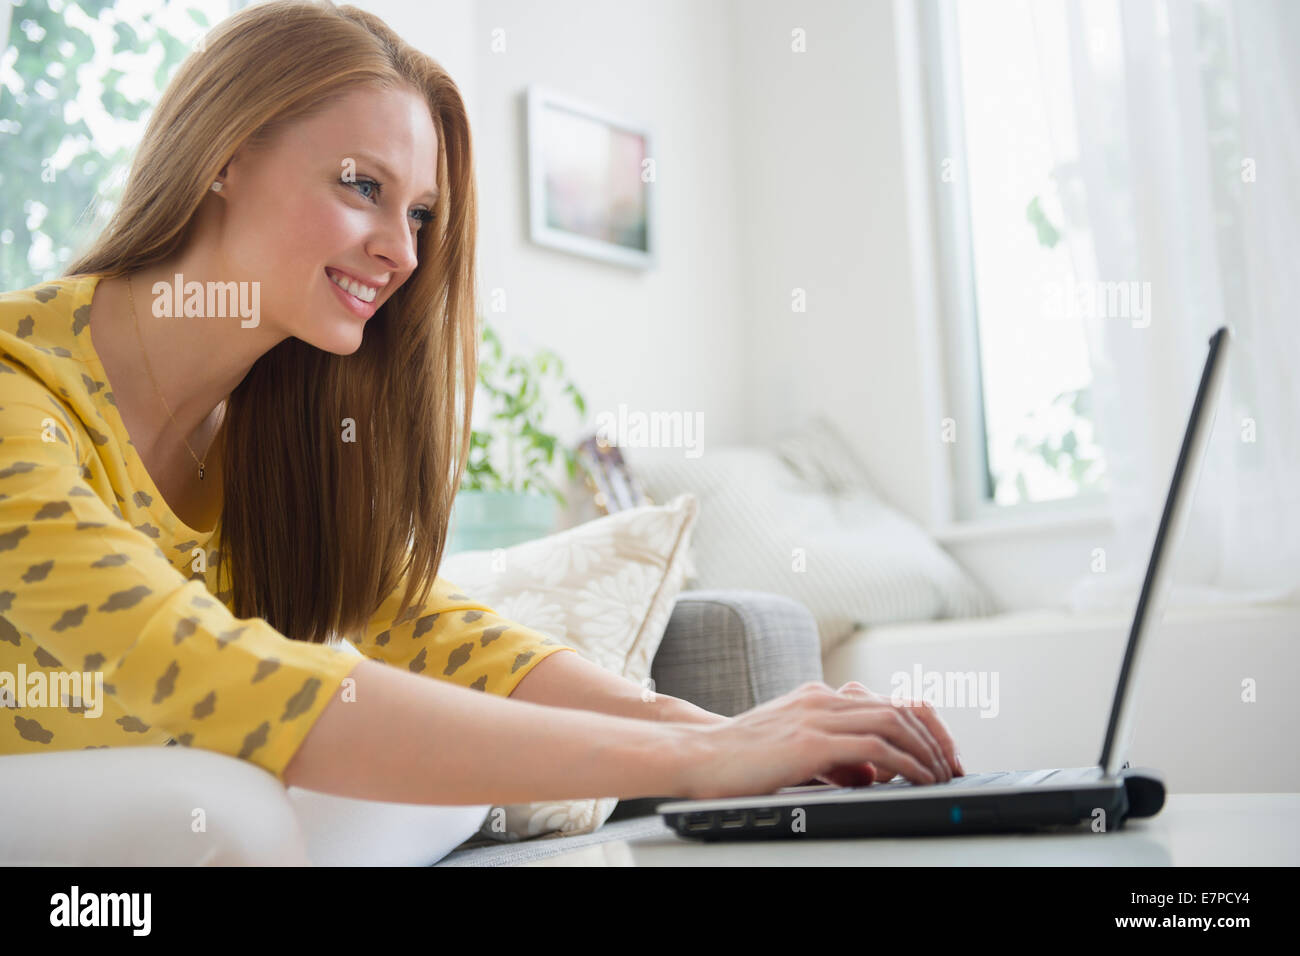 Young woman using laptop in living room Stock Photo